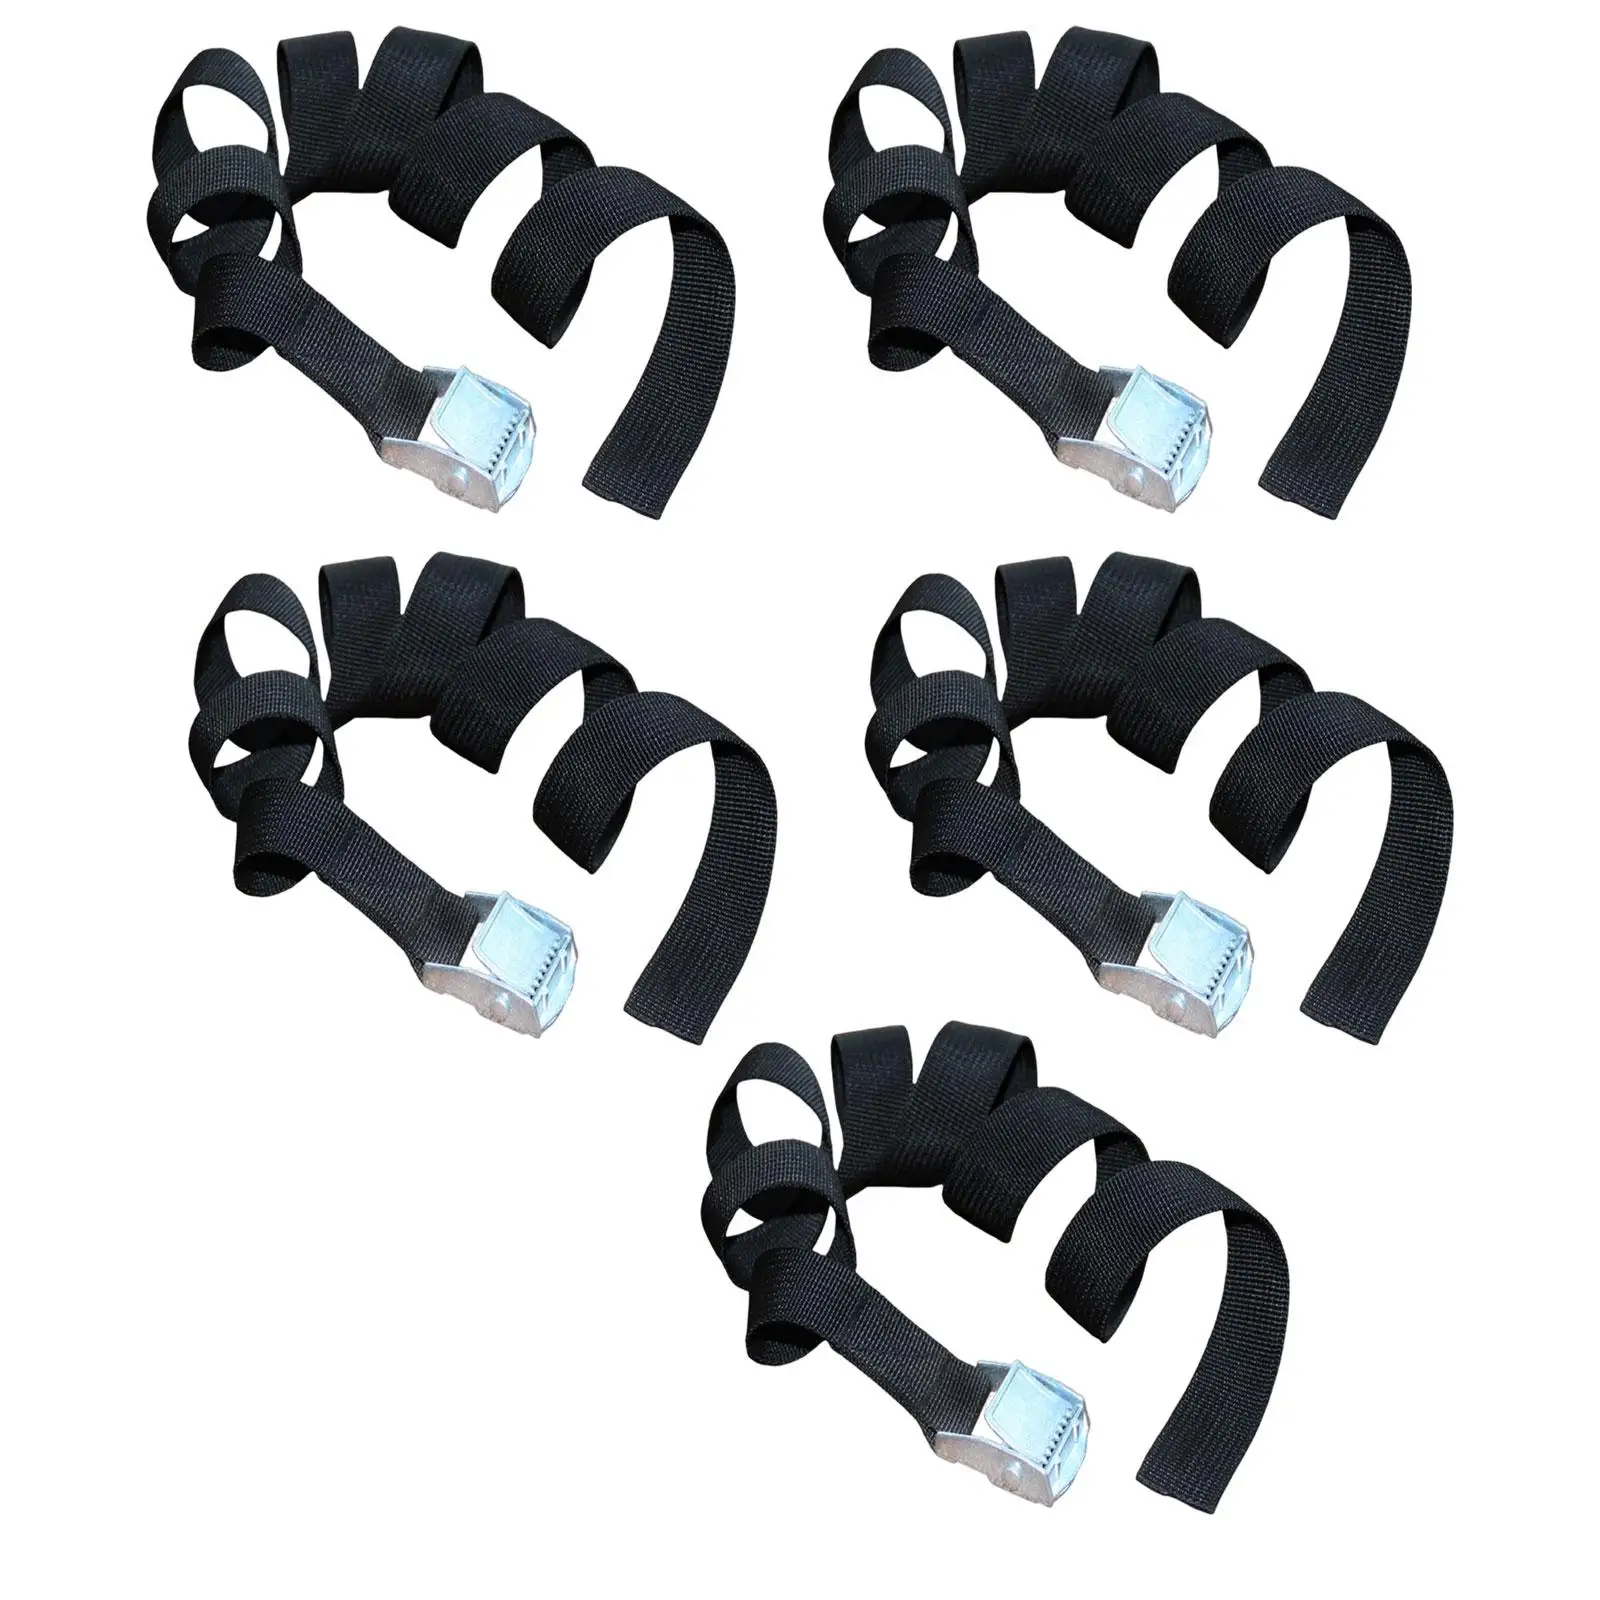 5x Tie Down Strap Zinc Alloy Press Buckle Luggage Strap for SUV Fixing